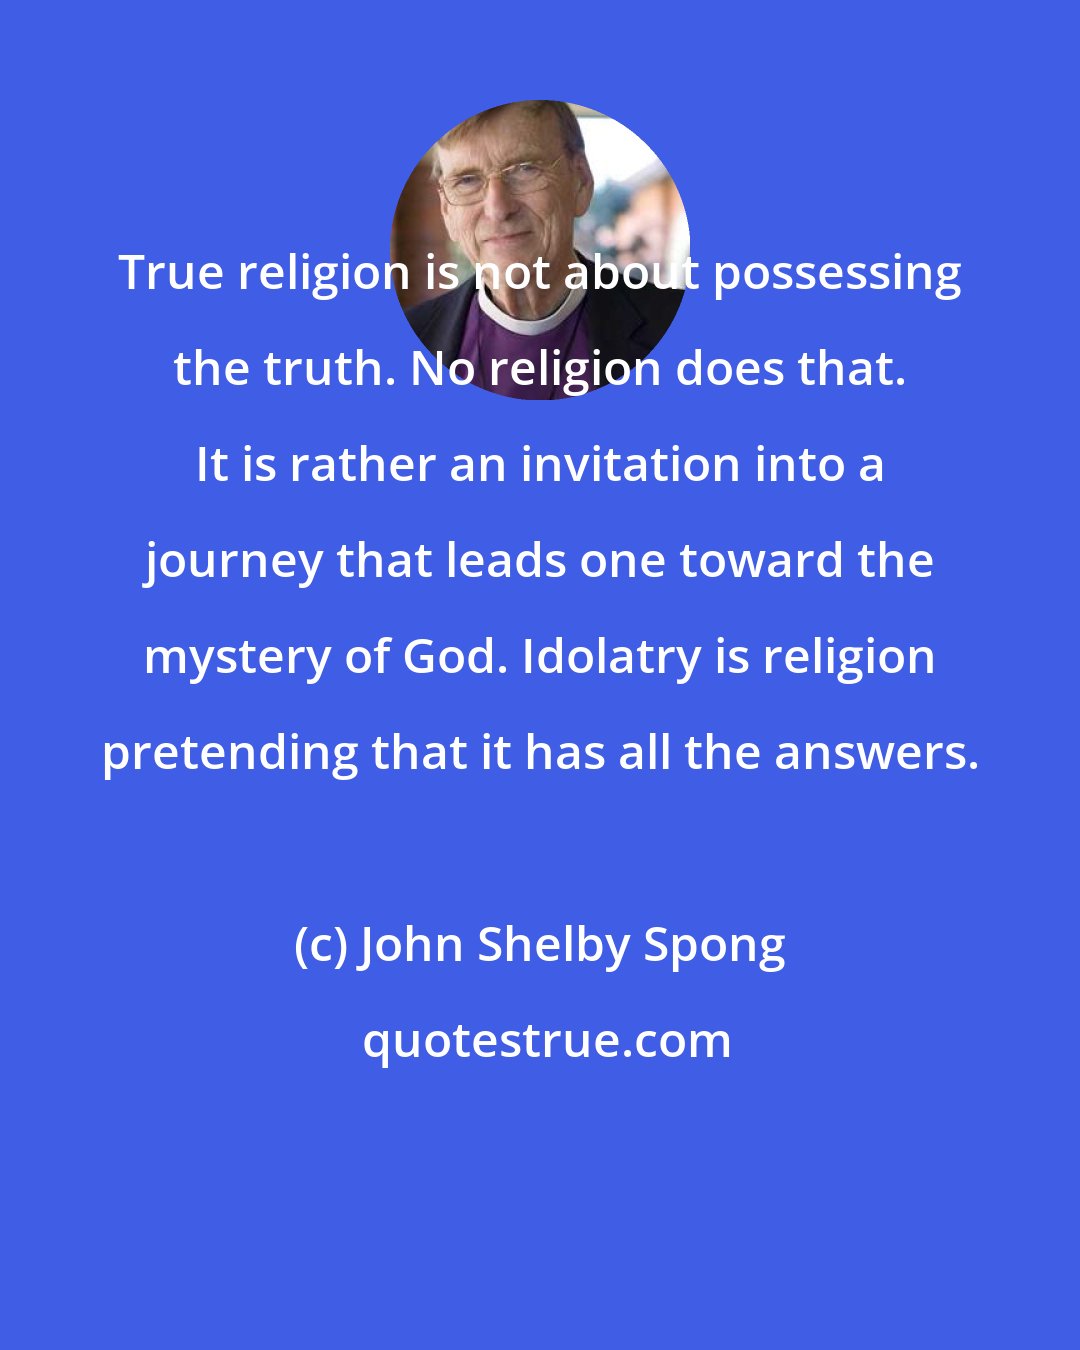 John Shelby Spong: True religion is not about possessing the truth. No religion does that. It is rather an invitation into a journey that leads one toward the mystery of God. Idolatry is religion pretending that it has all the answers.